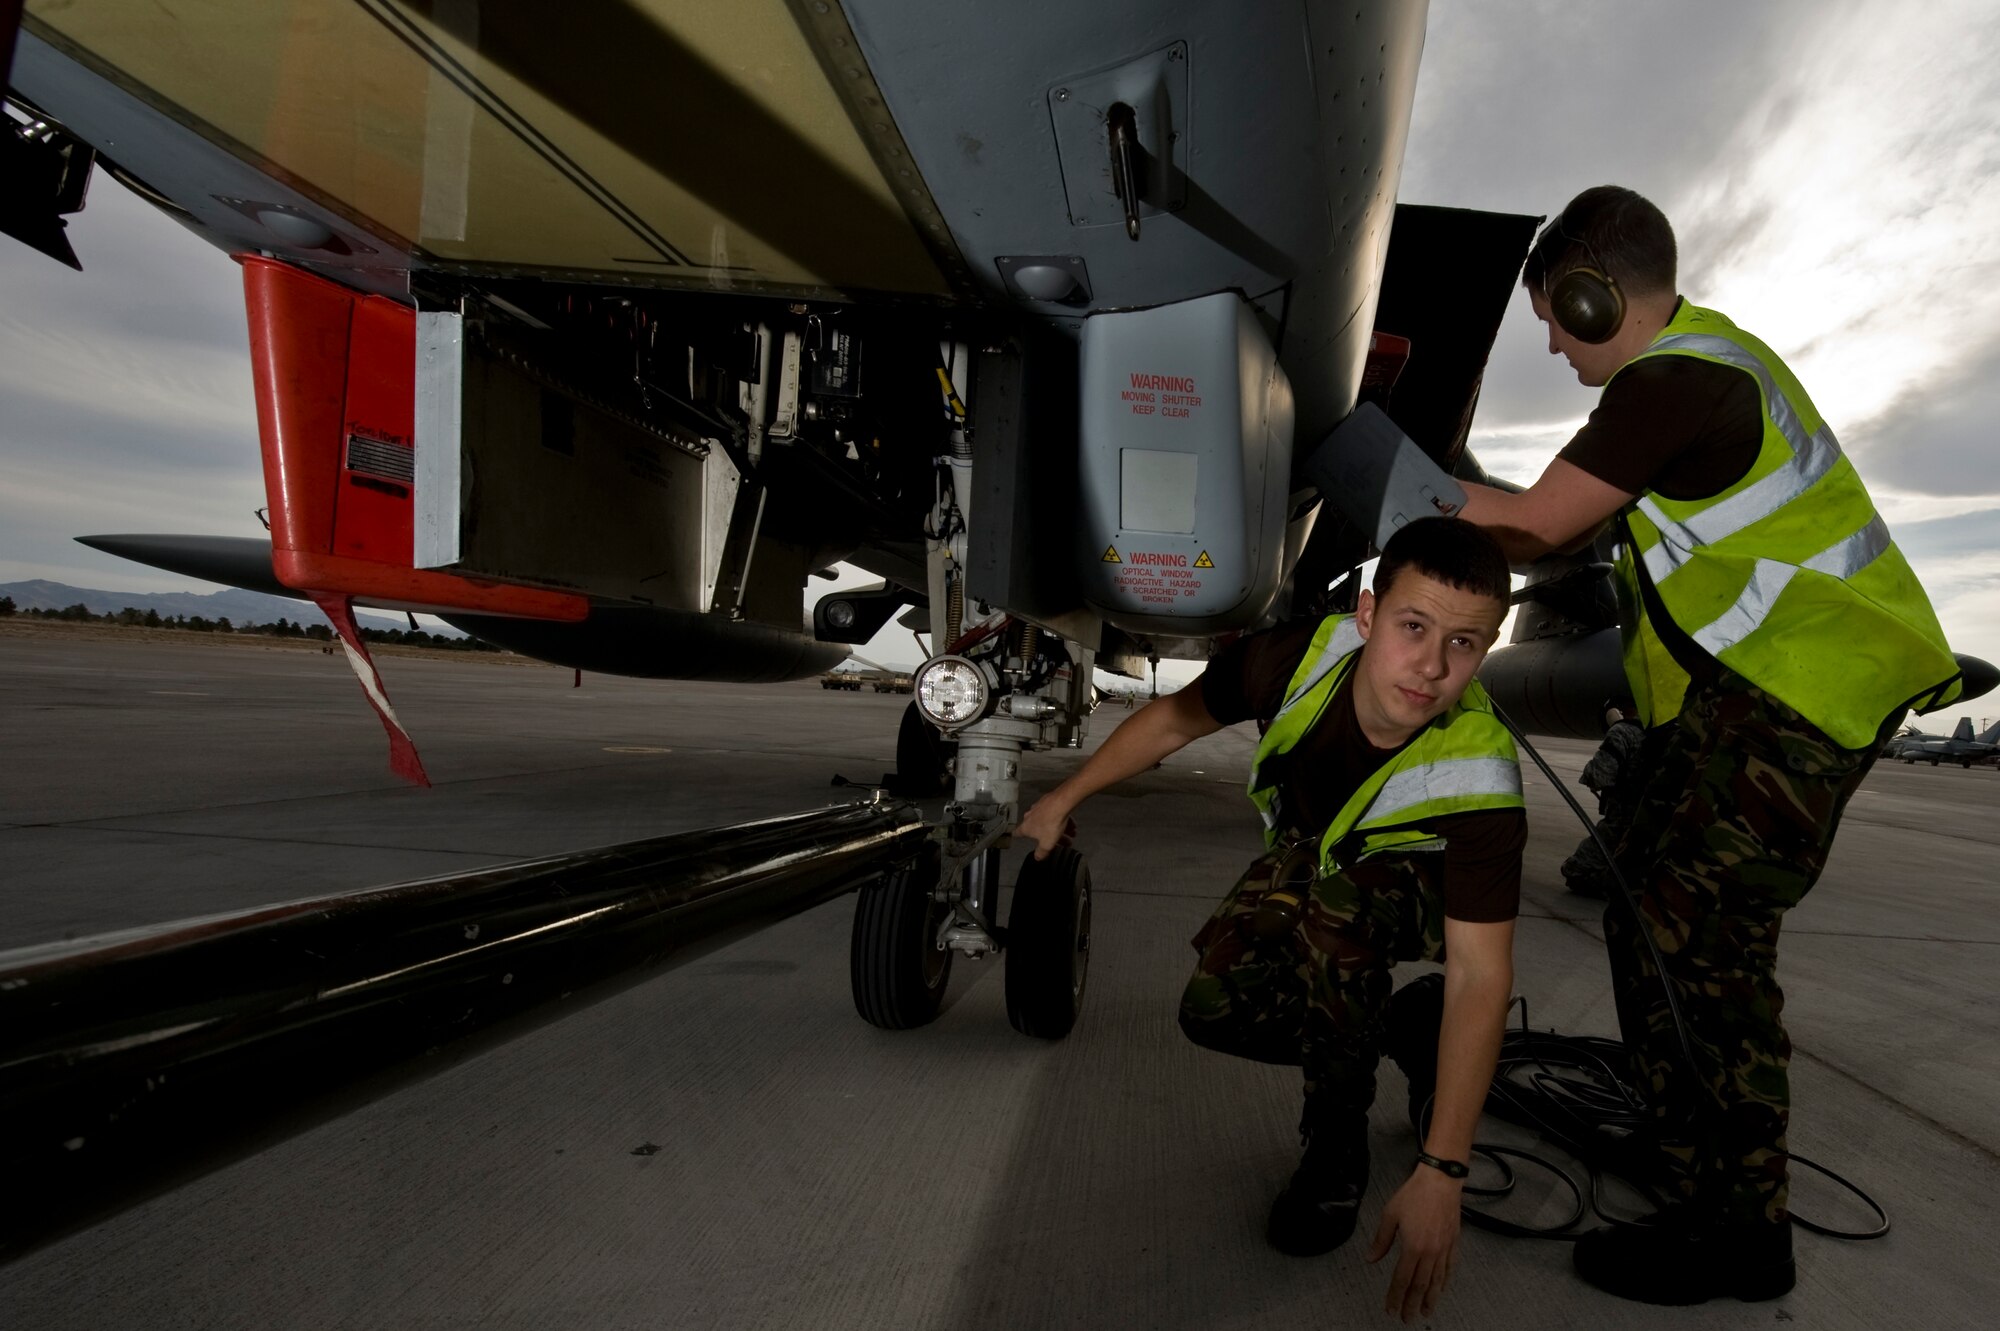 Royal Air Force of the United Kingdom, Senior Aircraftsman Rory Bennett  and Senior Aircraftsman Ryan Williams, both of the 2nd Army Cooperation Squadron, RAF Marham, conduct maintenance on a GR4 Tornado, during Red Flag 12-3 March 5, 2012, at Nellis Air Force Base, Nev. Red Flag is a realistic combat training exercise involving the air forces of the United States and its allies.(U.S. Air Force photo by Airman 1st Class Daniel Hughes)